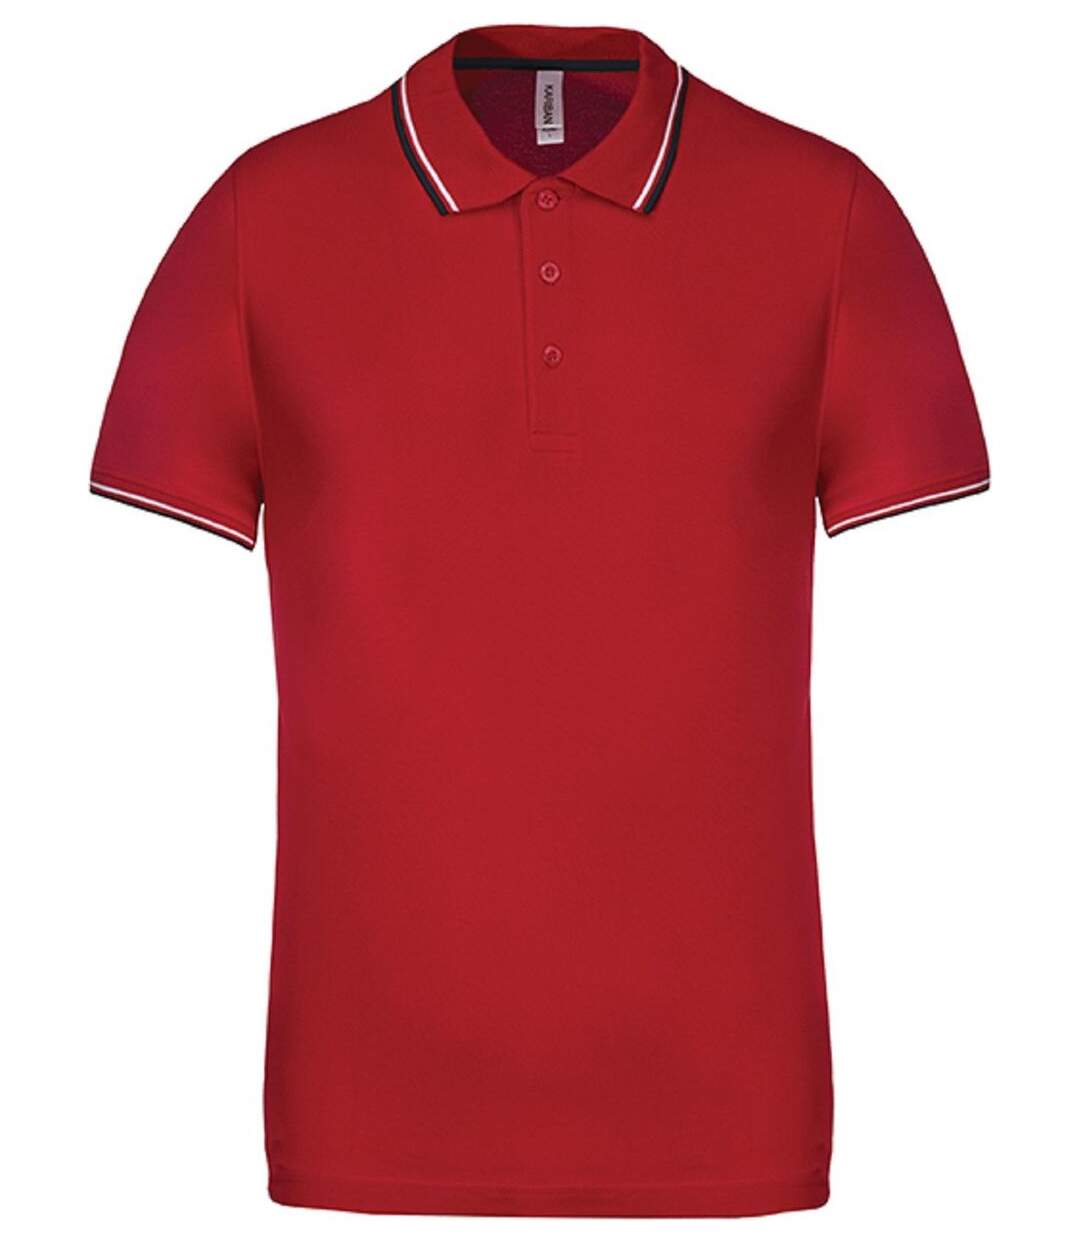 Polo bandes contrastées homme - K250 - rouge -navy-white - manches courtes